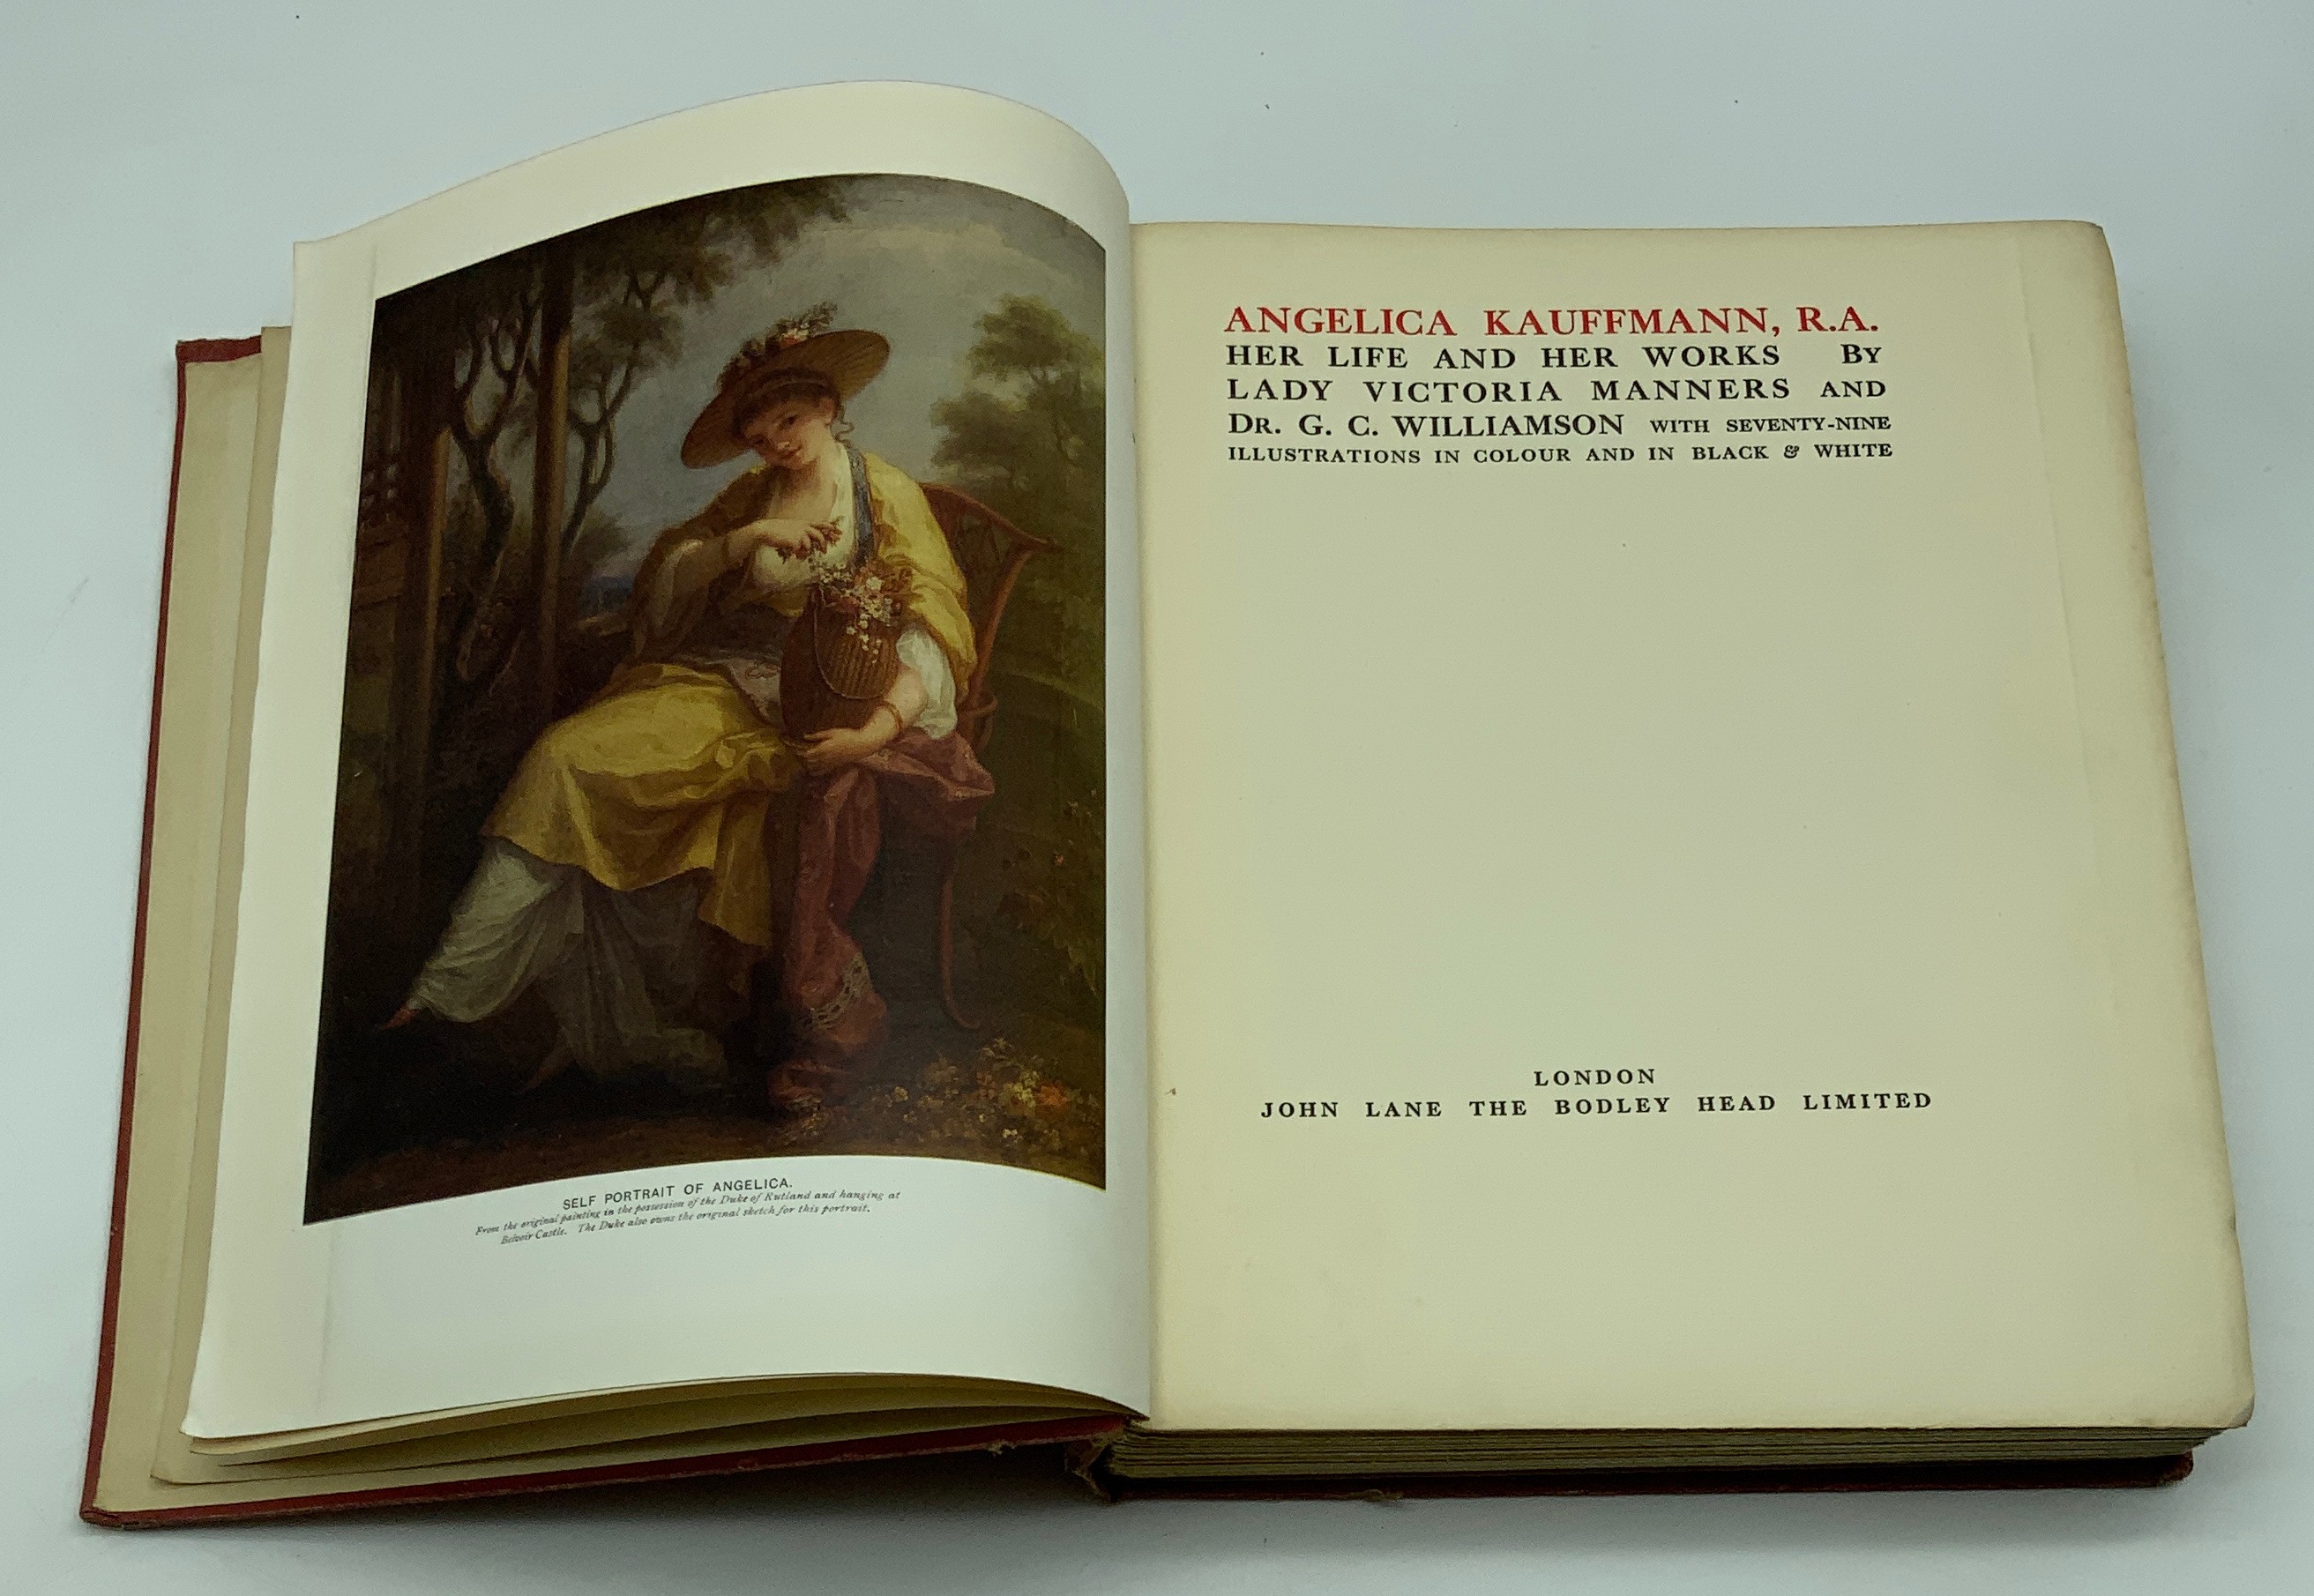 ANGELICA KAUFFMANN R.A. HER LIFE AND WORKS BY LADY VICTORIA MANNERS DR G C WILLIAMSON LTD ED A/F - Image 3 of 5